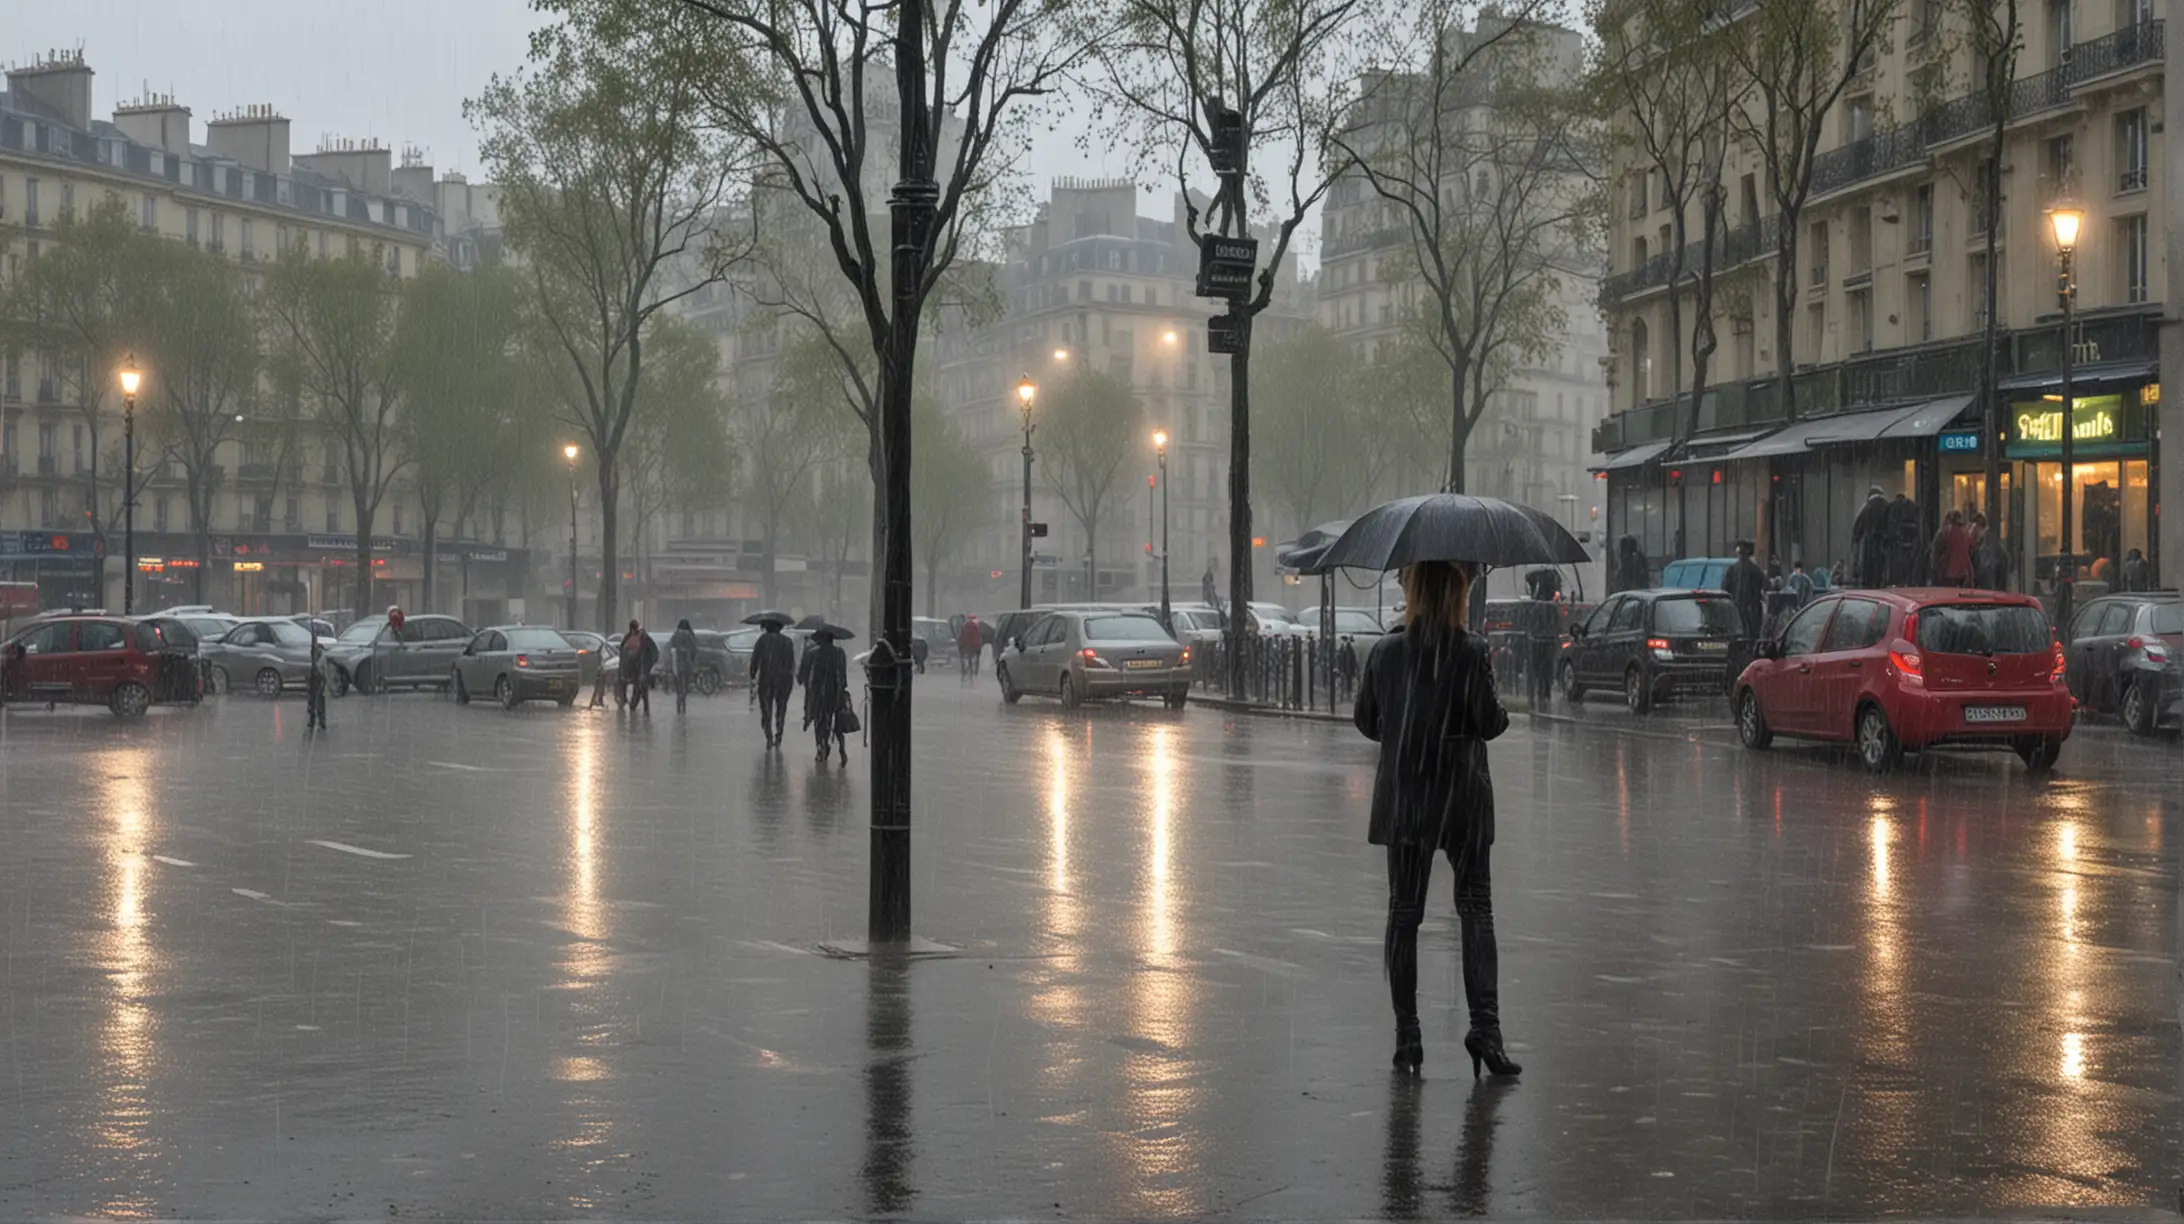 Rainy Evening in Paris Cityscape with Umbrellas and Glistening Streets